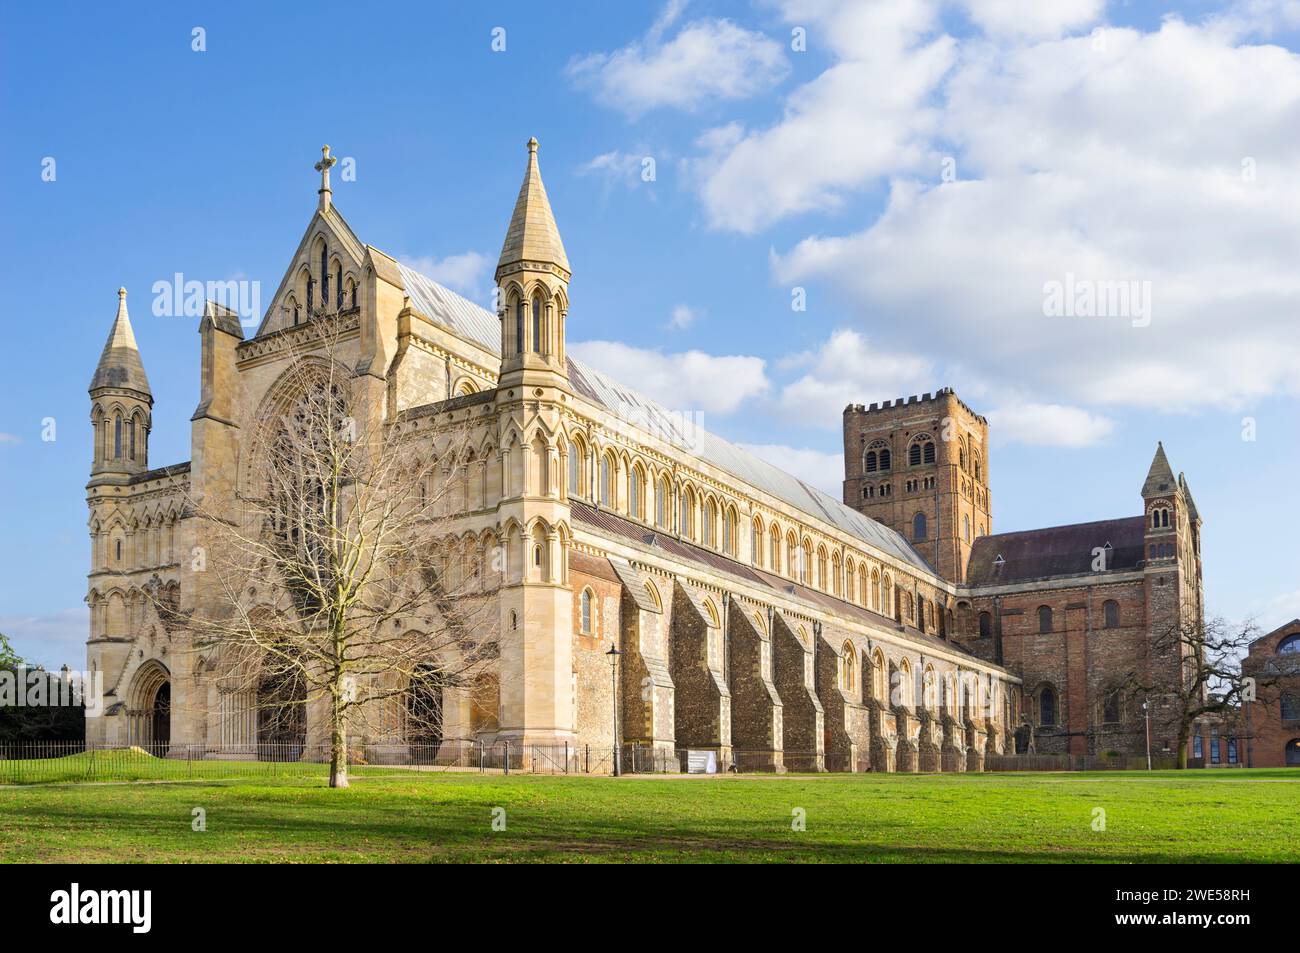 St Albans Cathedral or the Abbey Church of St Alban, St Albans Hertfordshire England UK GB Europe Stock Photo